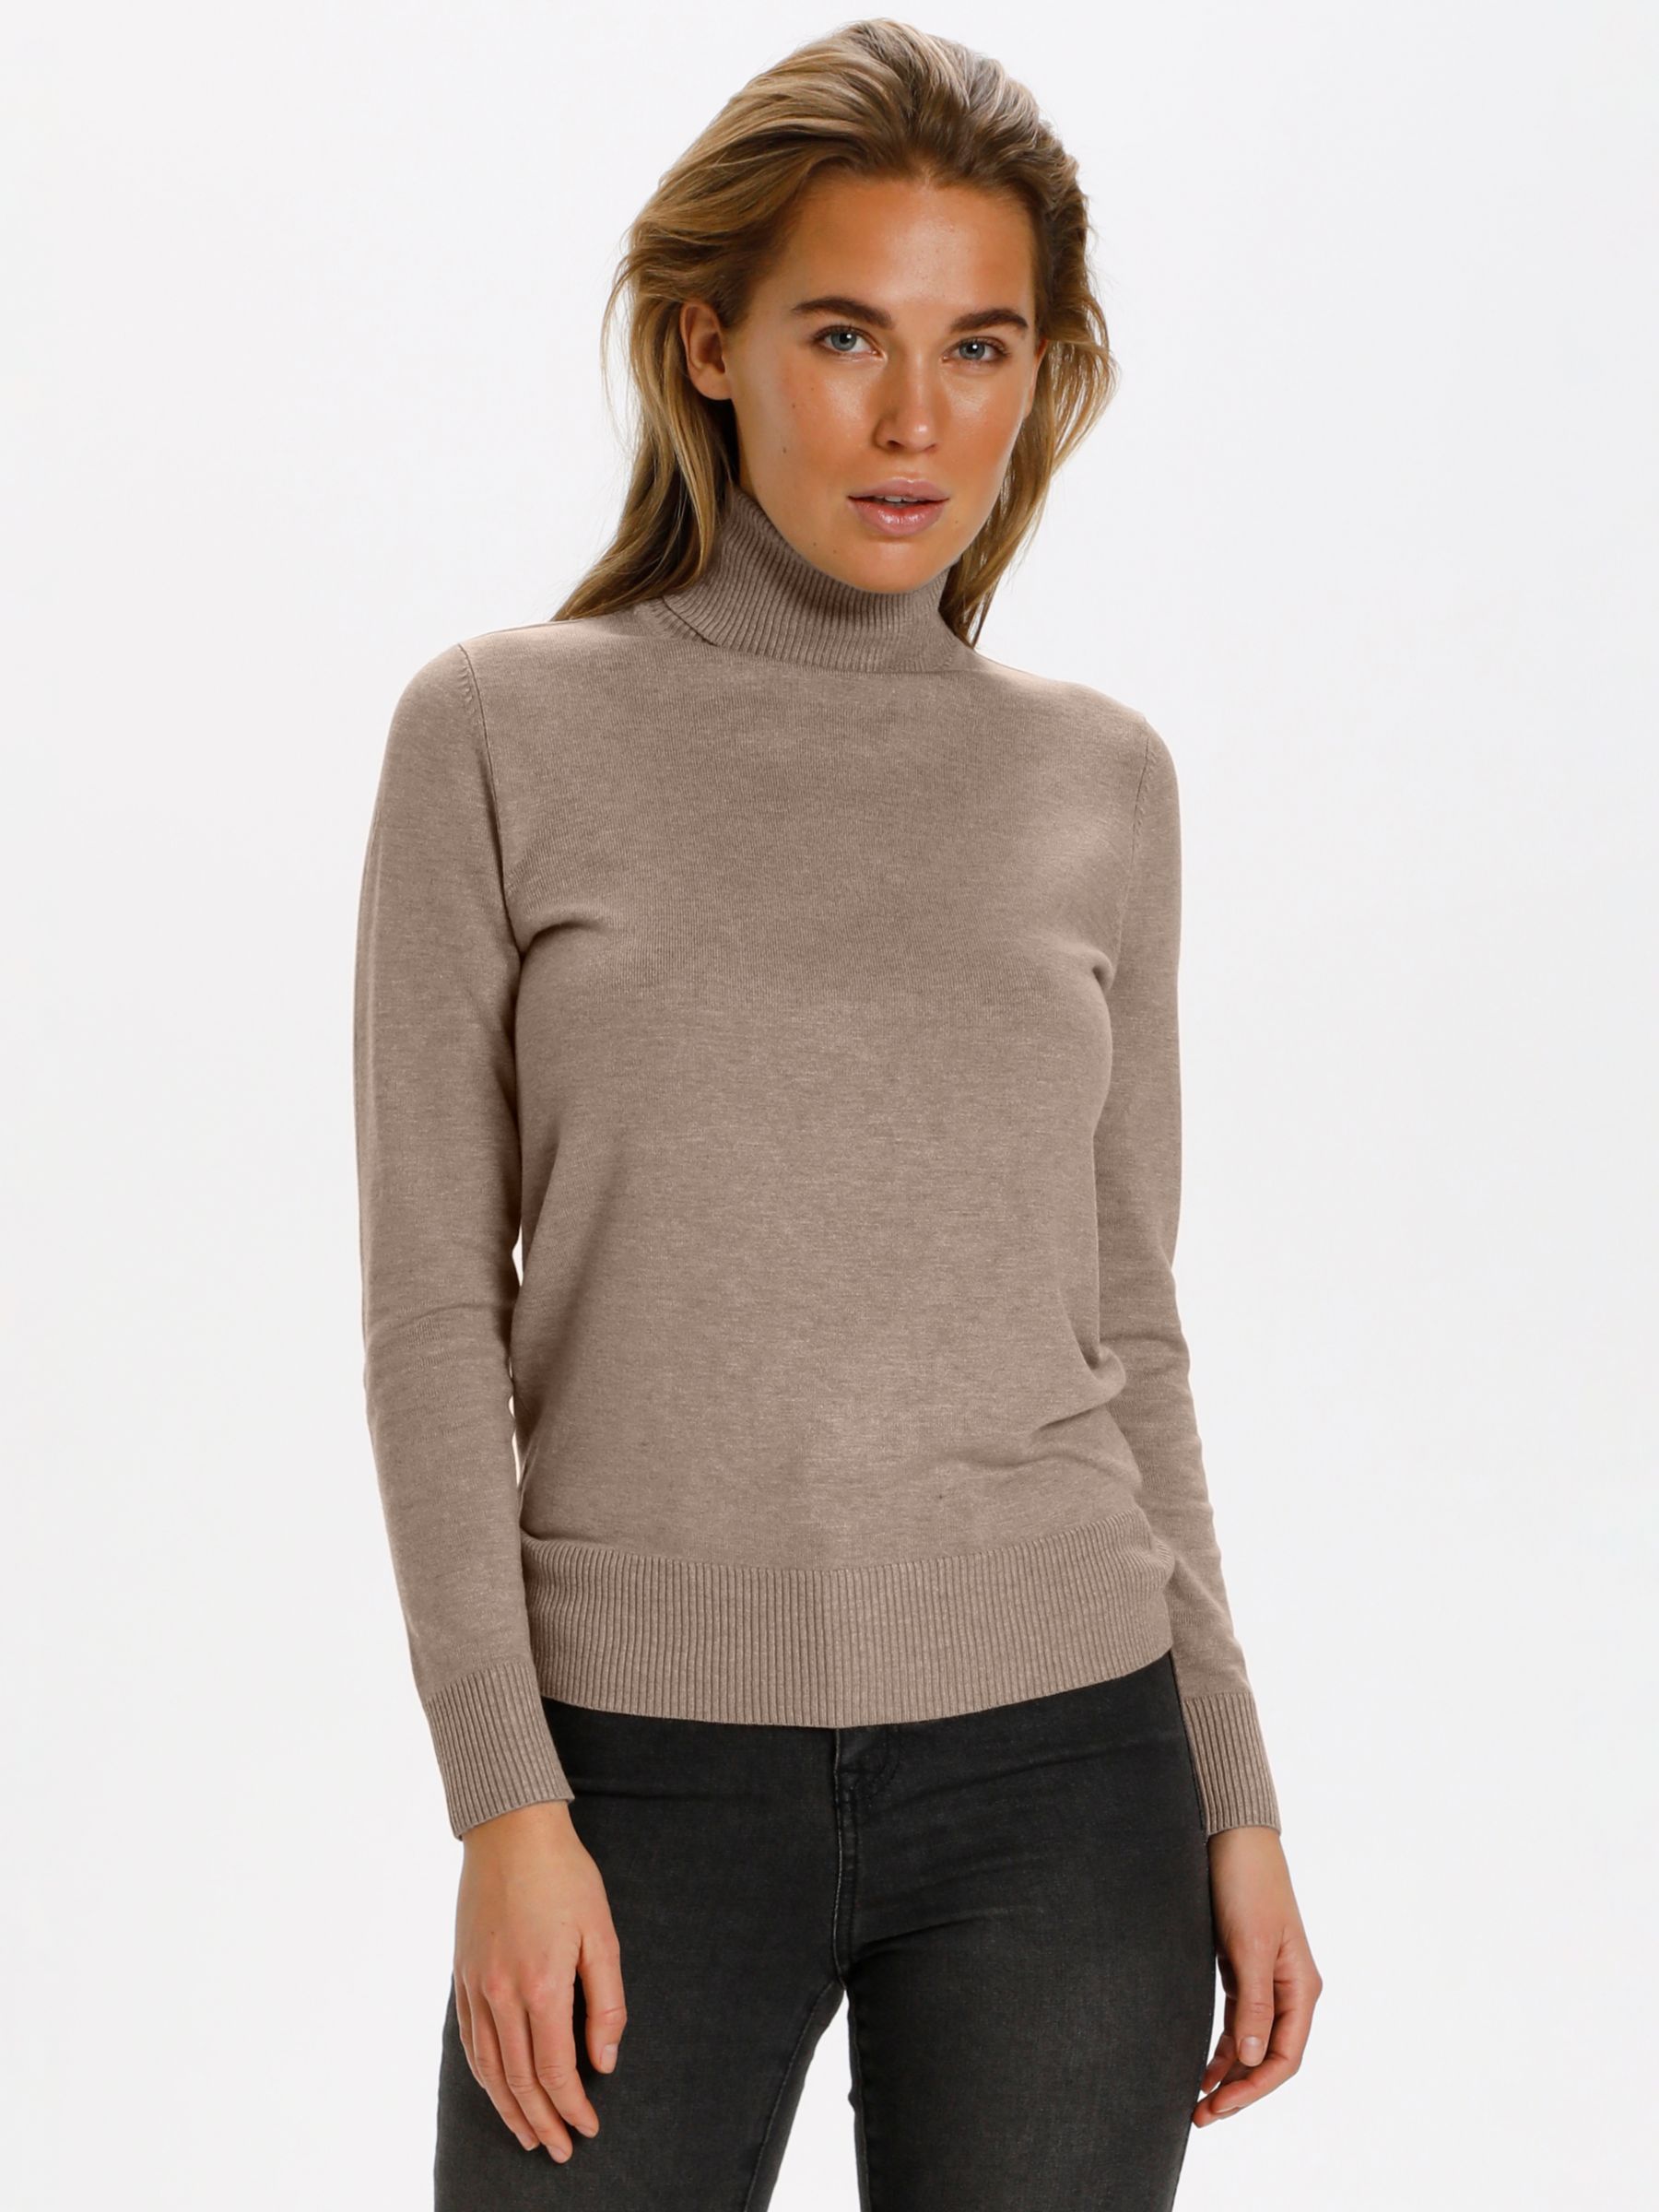 Polo Neck Jumpers: Yay or Nay?